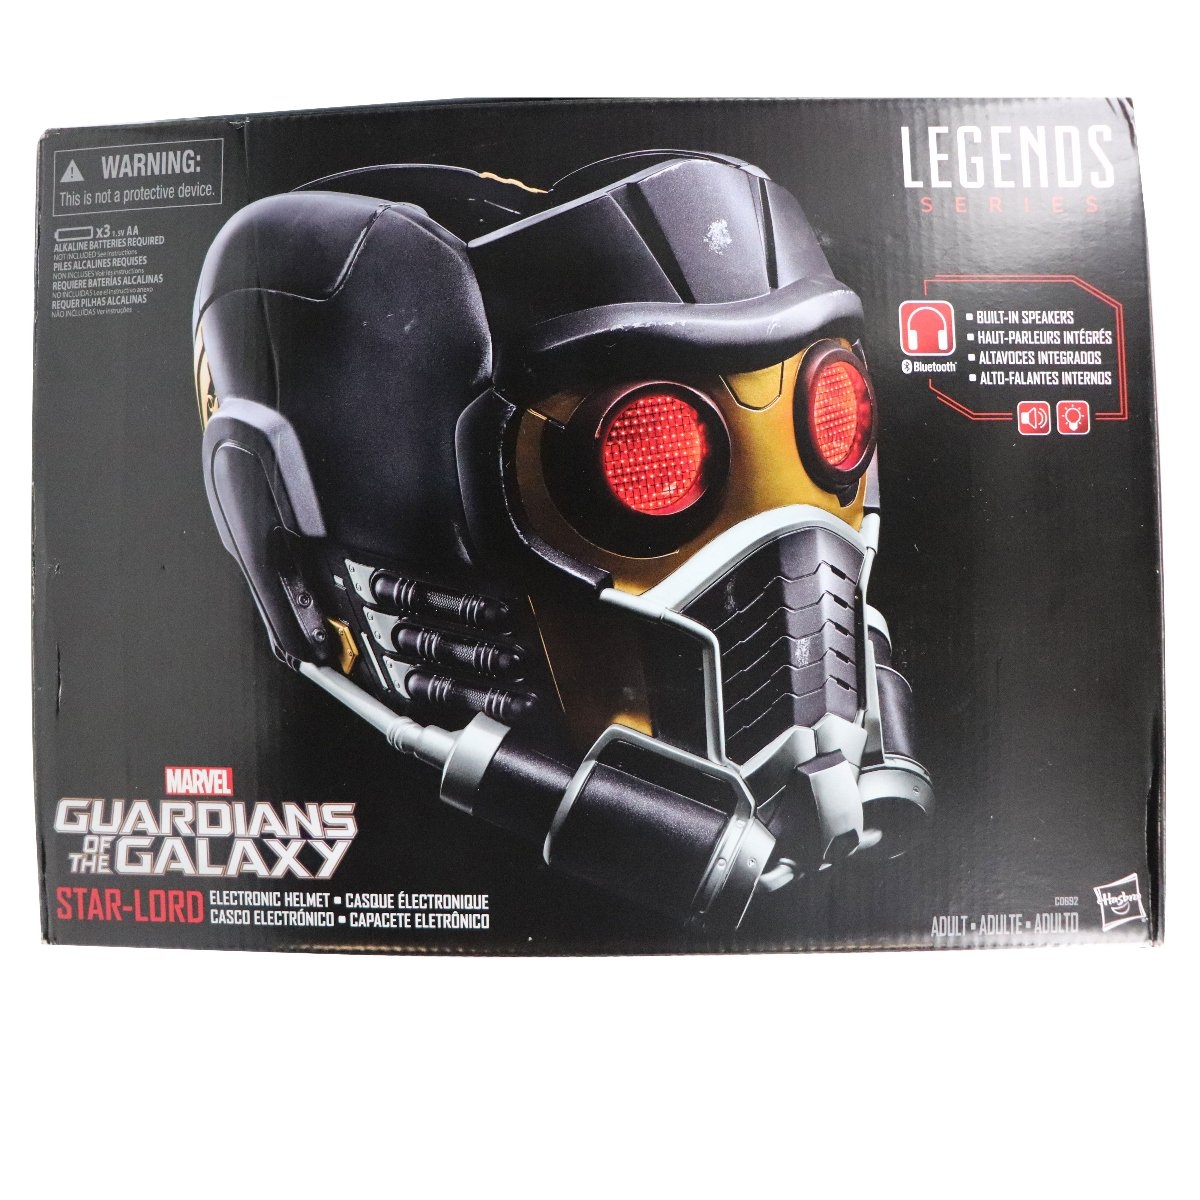 Marvel C0692 Star Lord Electronic Helmet Action Figure for sale online 